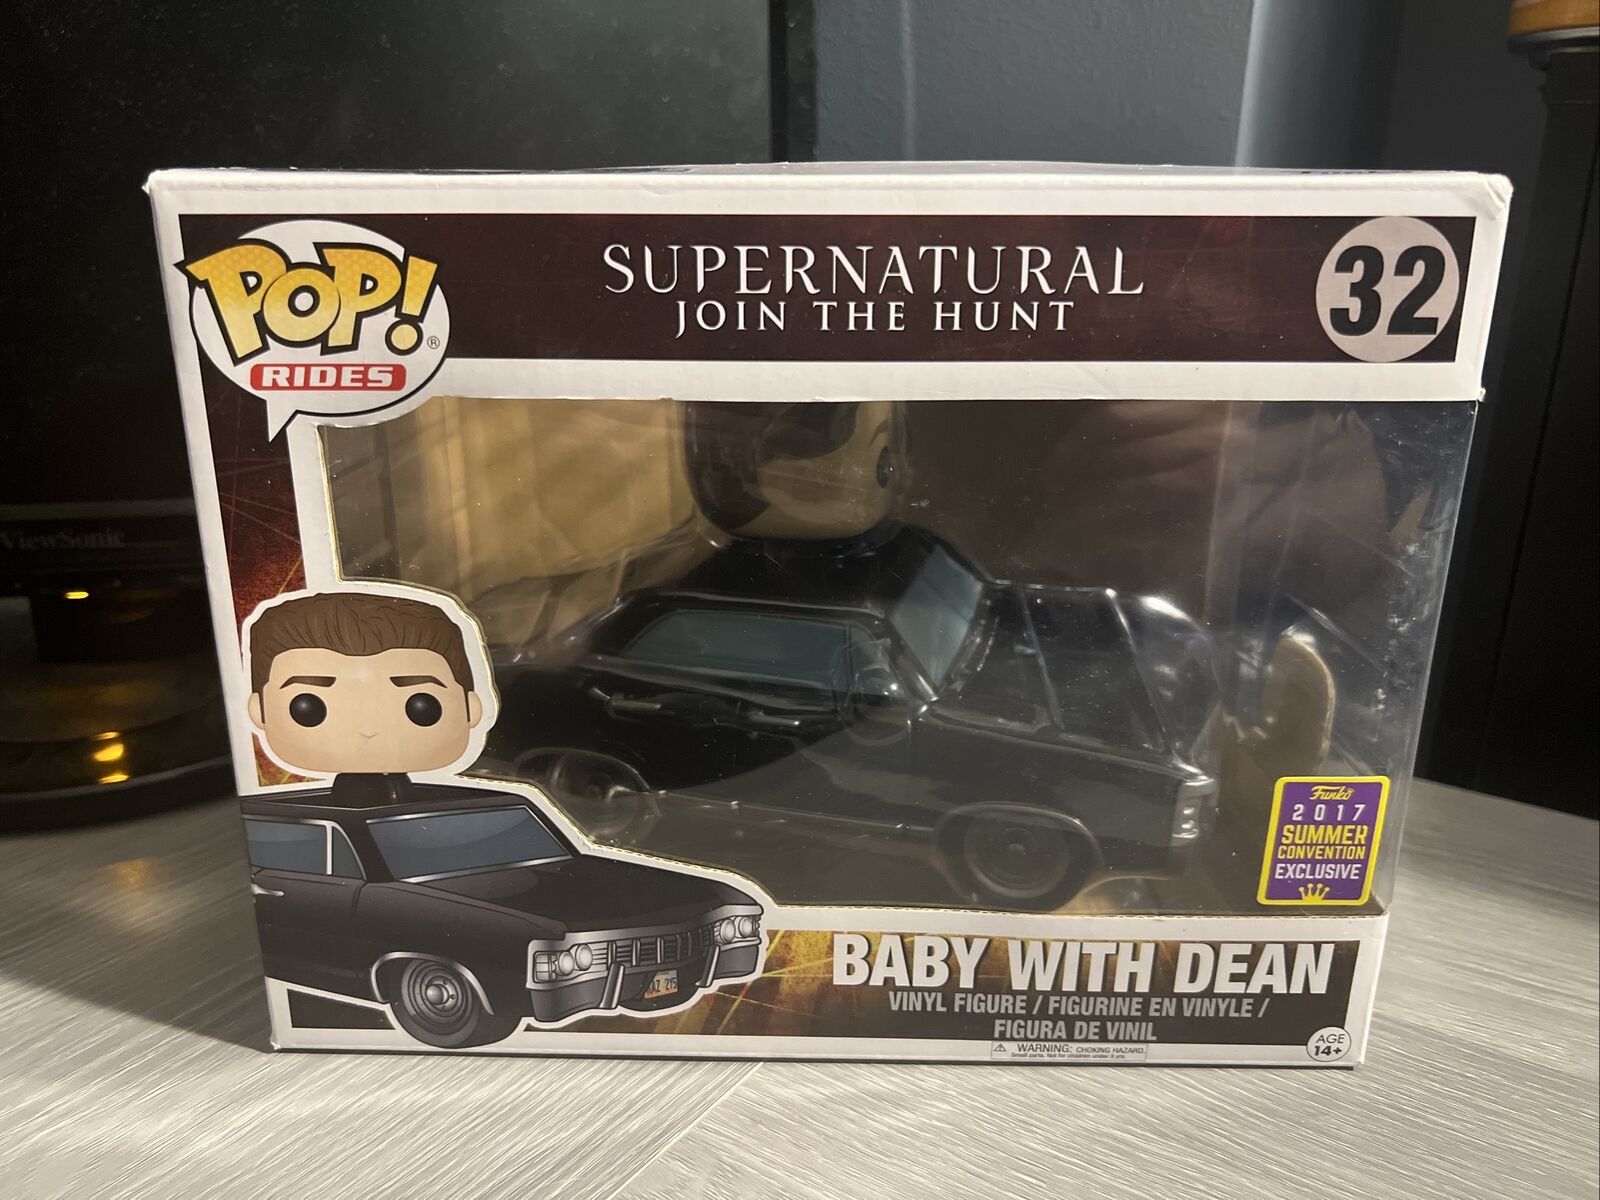 Baby with Dean Funko Pop Supernatural #32 SDCC 2017 Summer Convention Exclusive